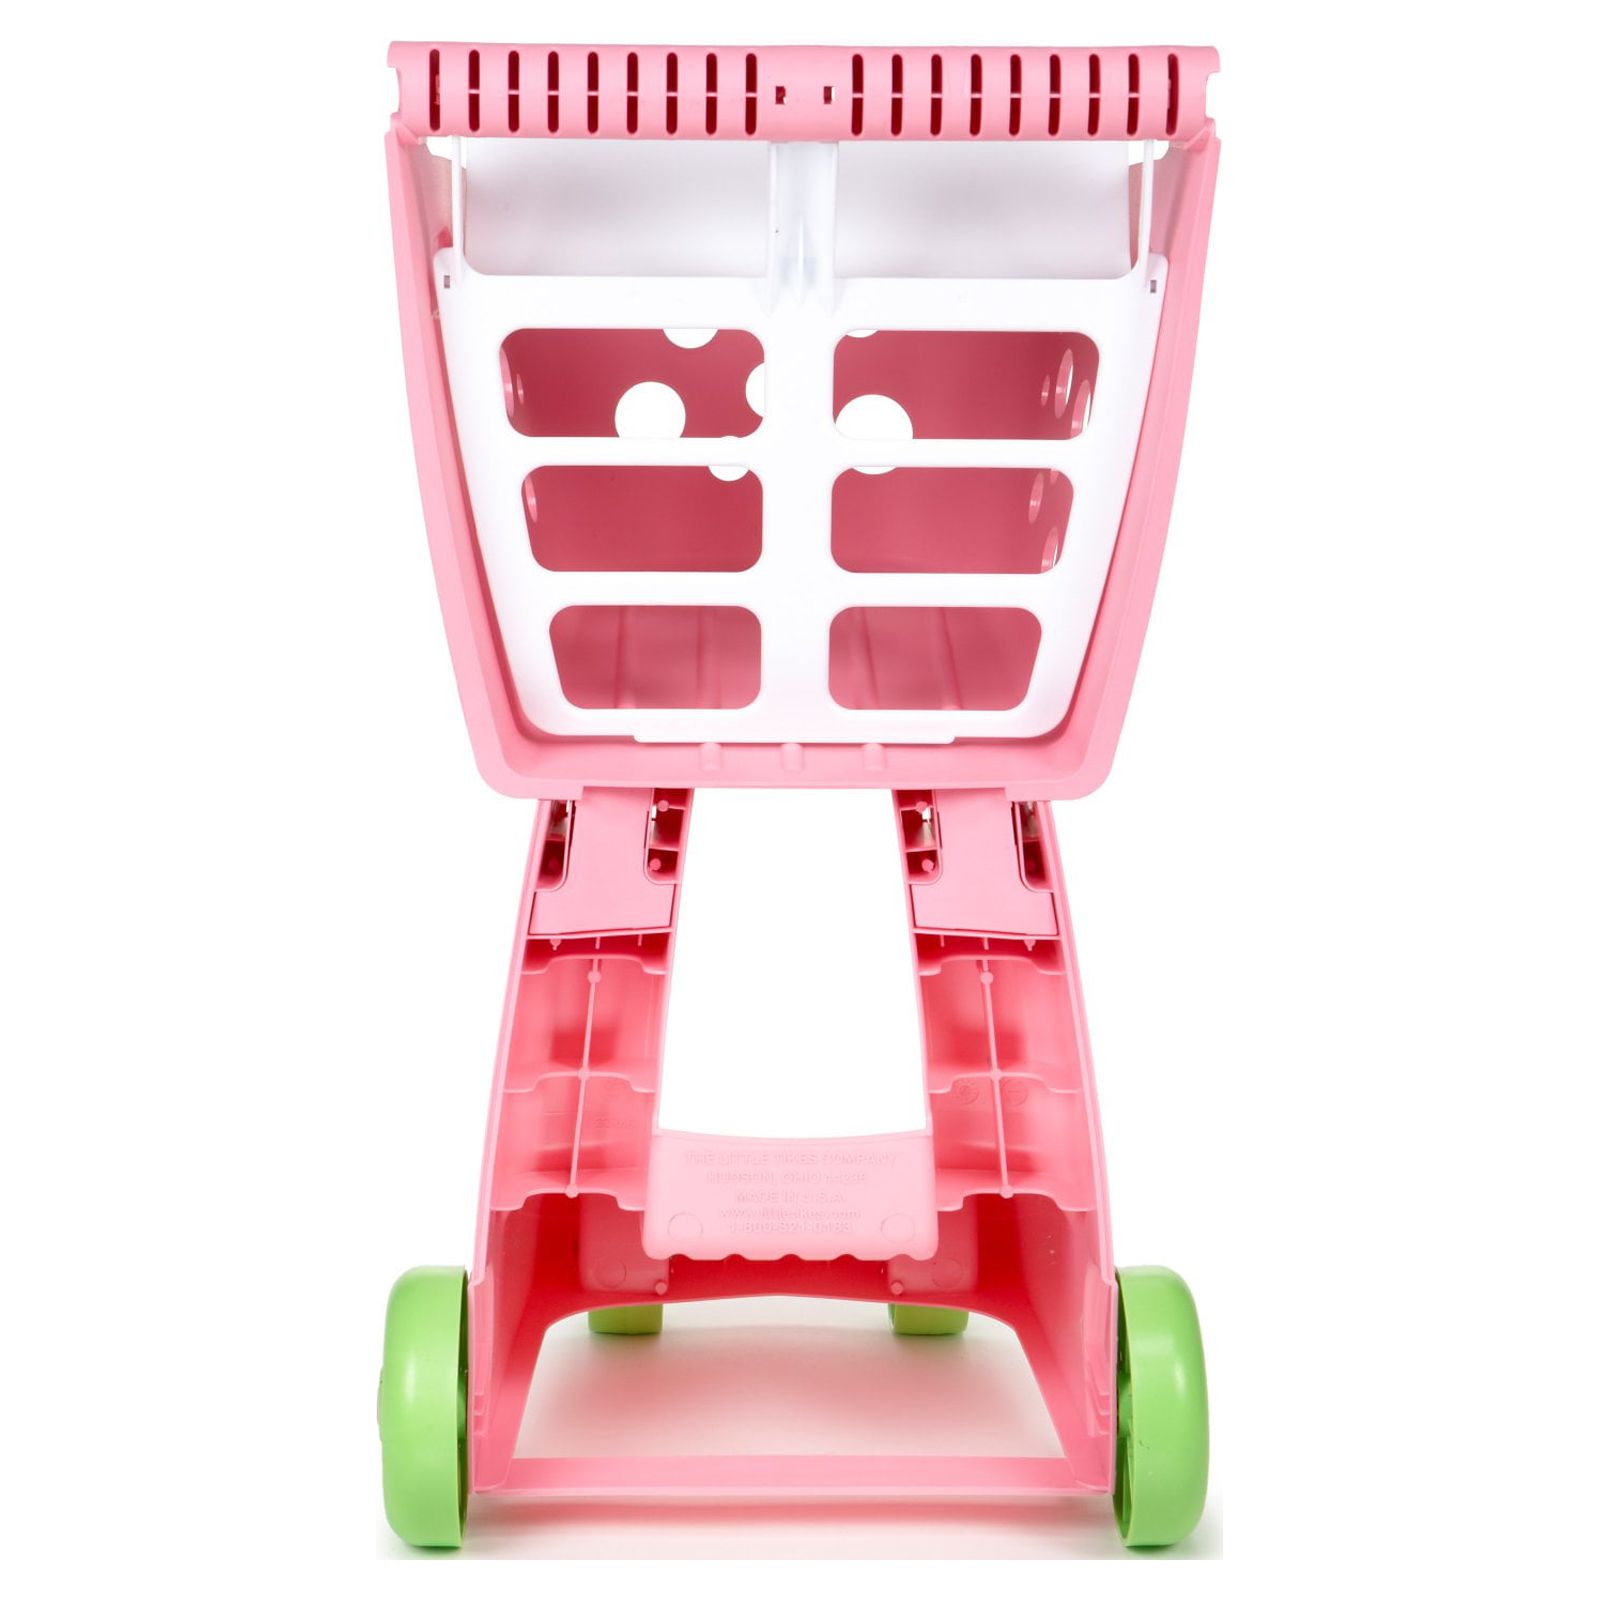 Little Tikes Lil Shopper - Pink For Girls and Boys Ages 1 Year + - image 5 of 7